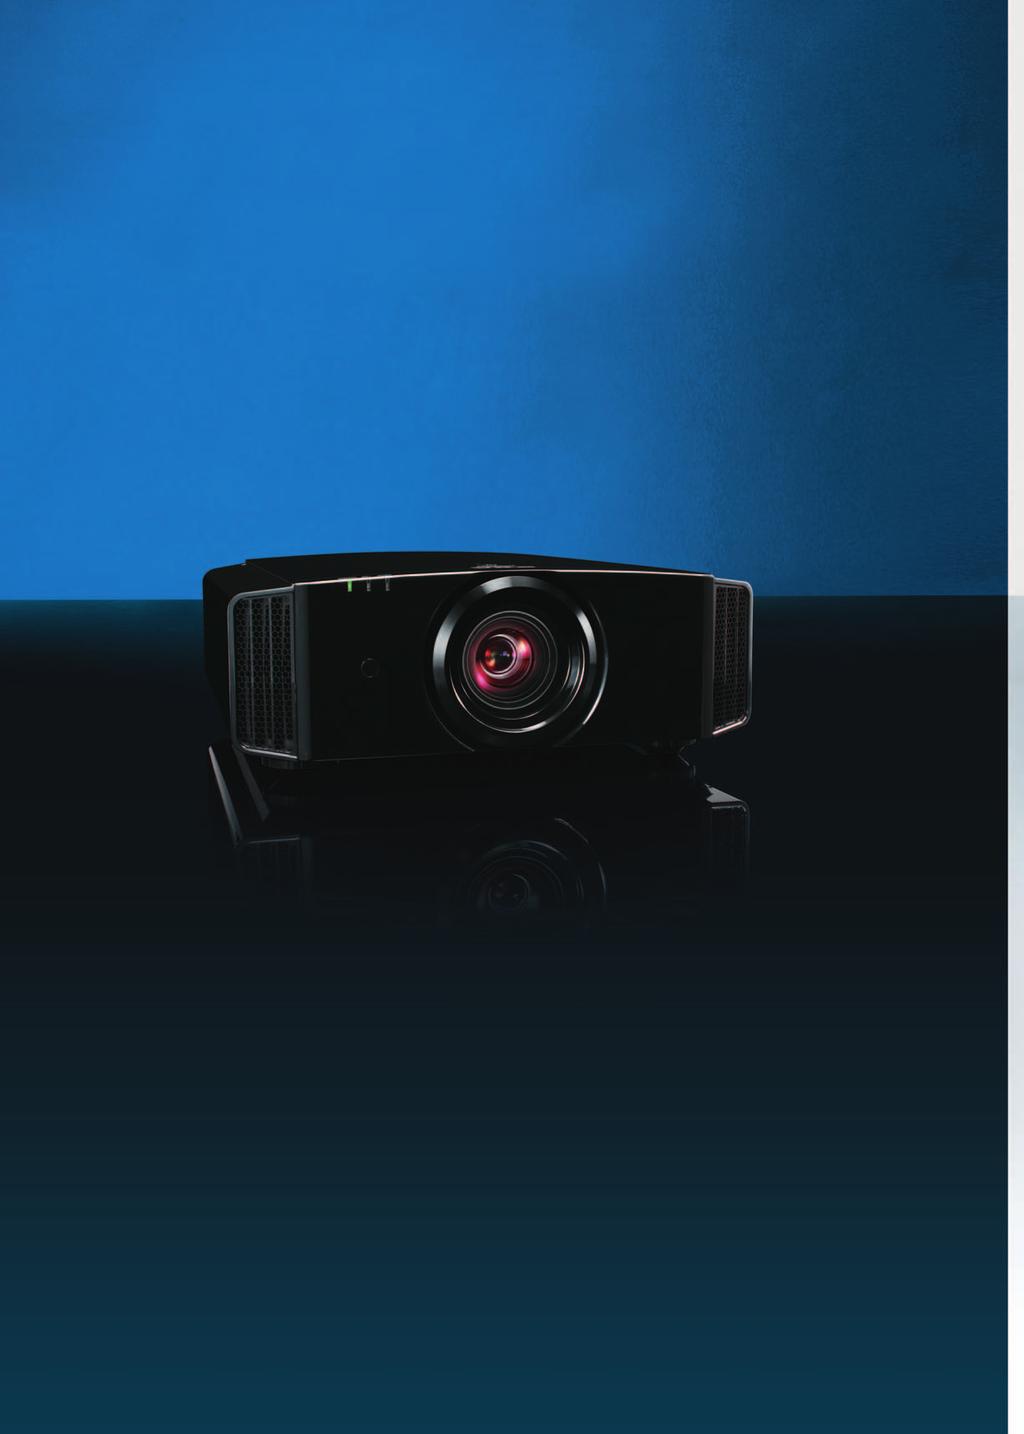 High-definition Projector that Perfectly Replicates Movie Quality. 4K Projection*, Native Contrast Ratio of 80,000:1, and Various Features for an Impressive Picture.